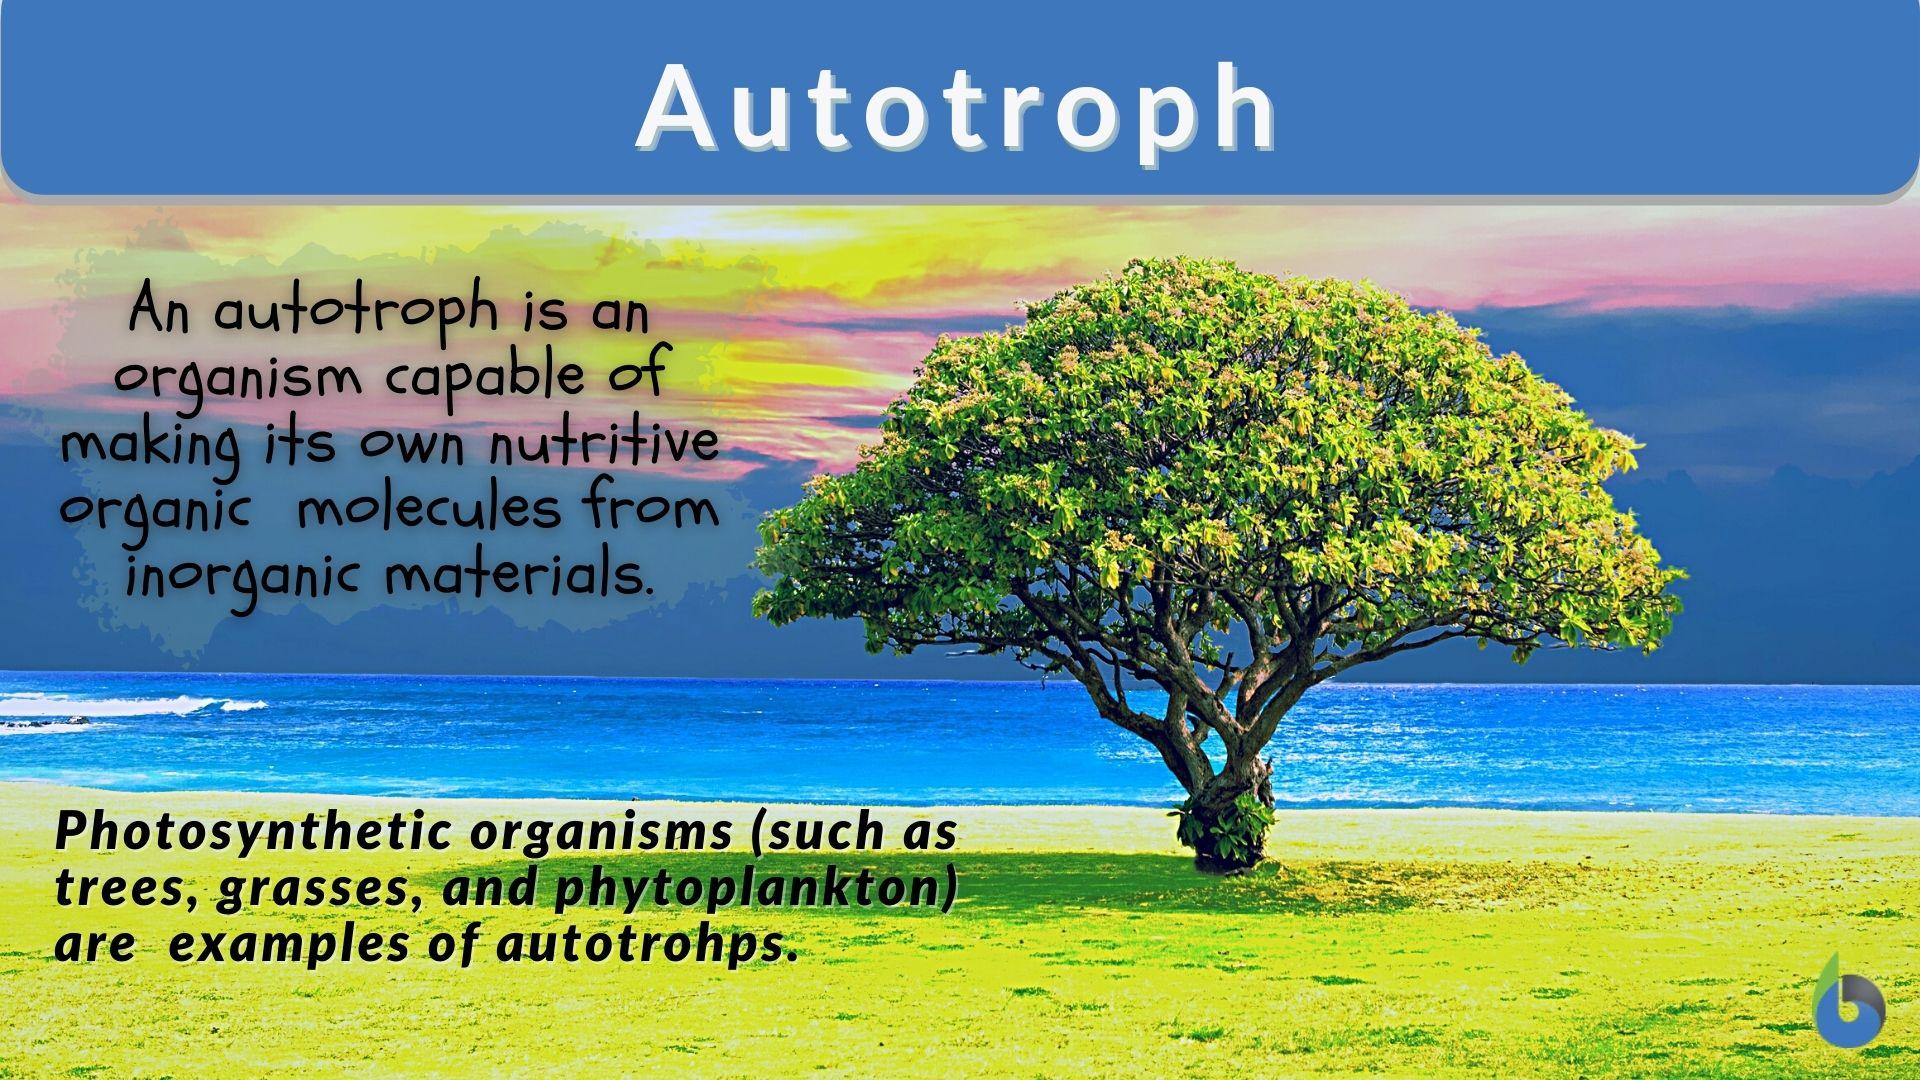 Autotroph - Definition and Examples - Biology Online Dictionary